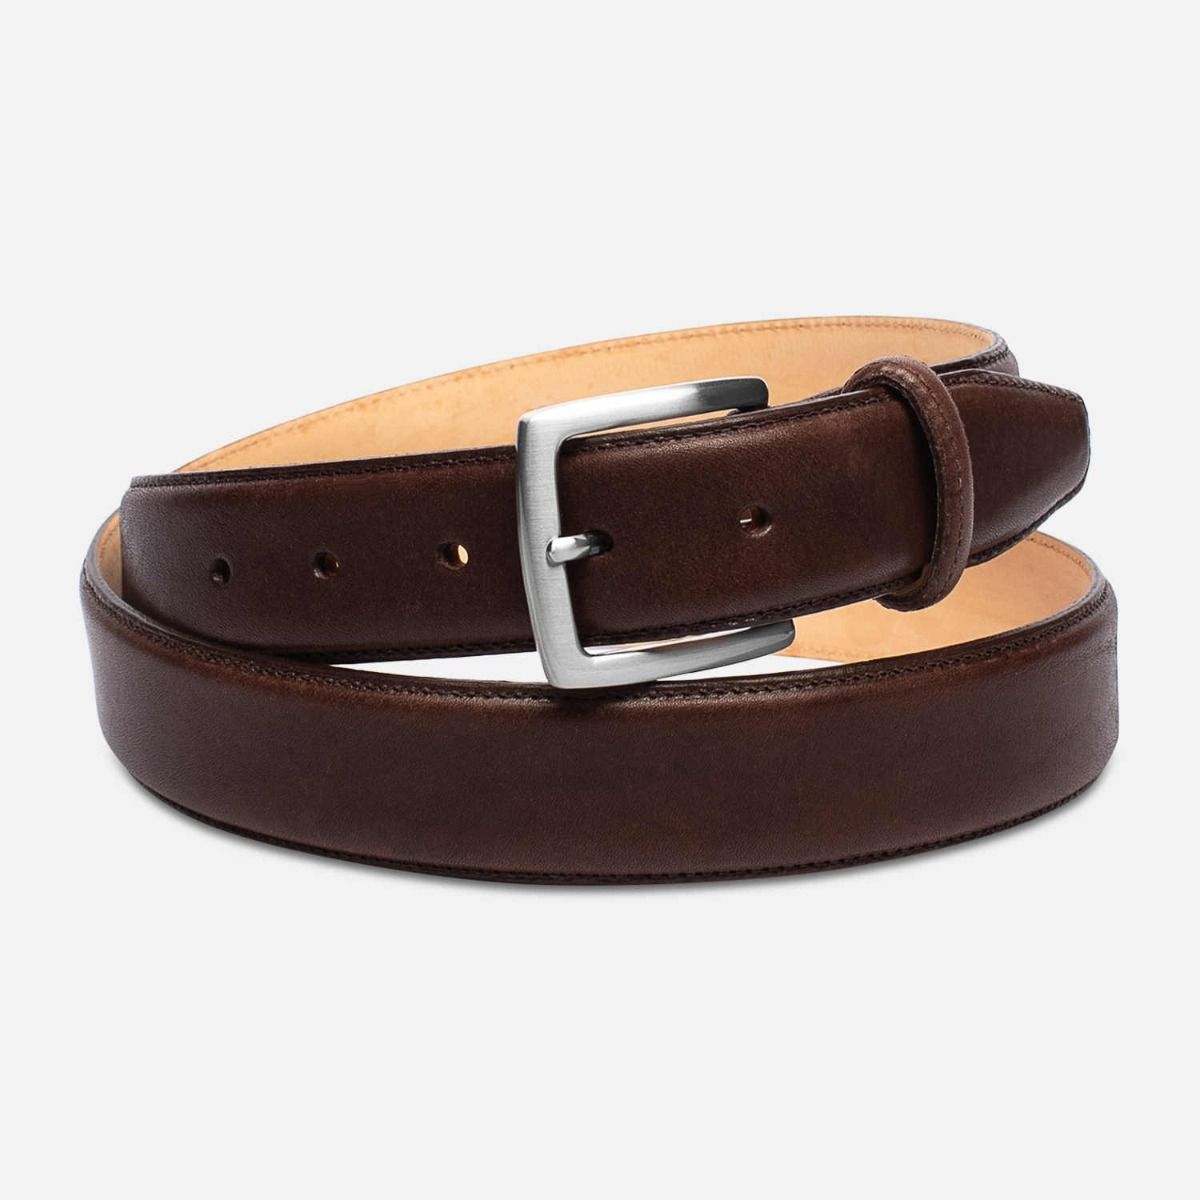 Dark Brown Leather Belt with Silver Buckle by Arthur Knight-32 inch Belt